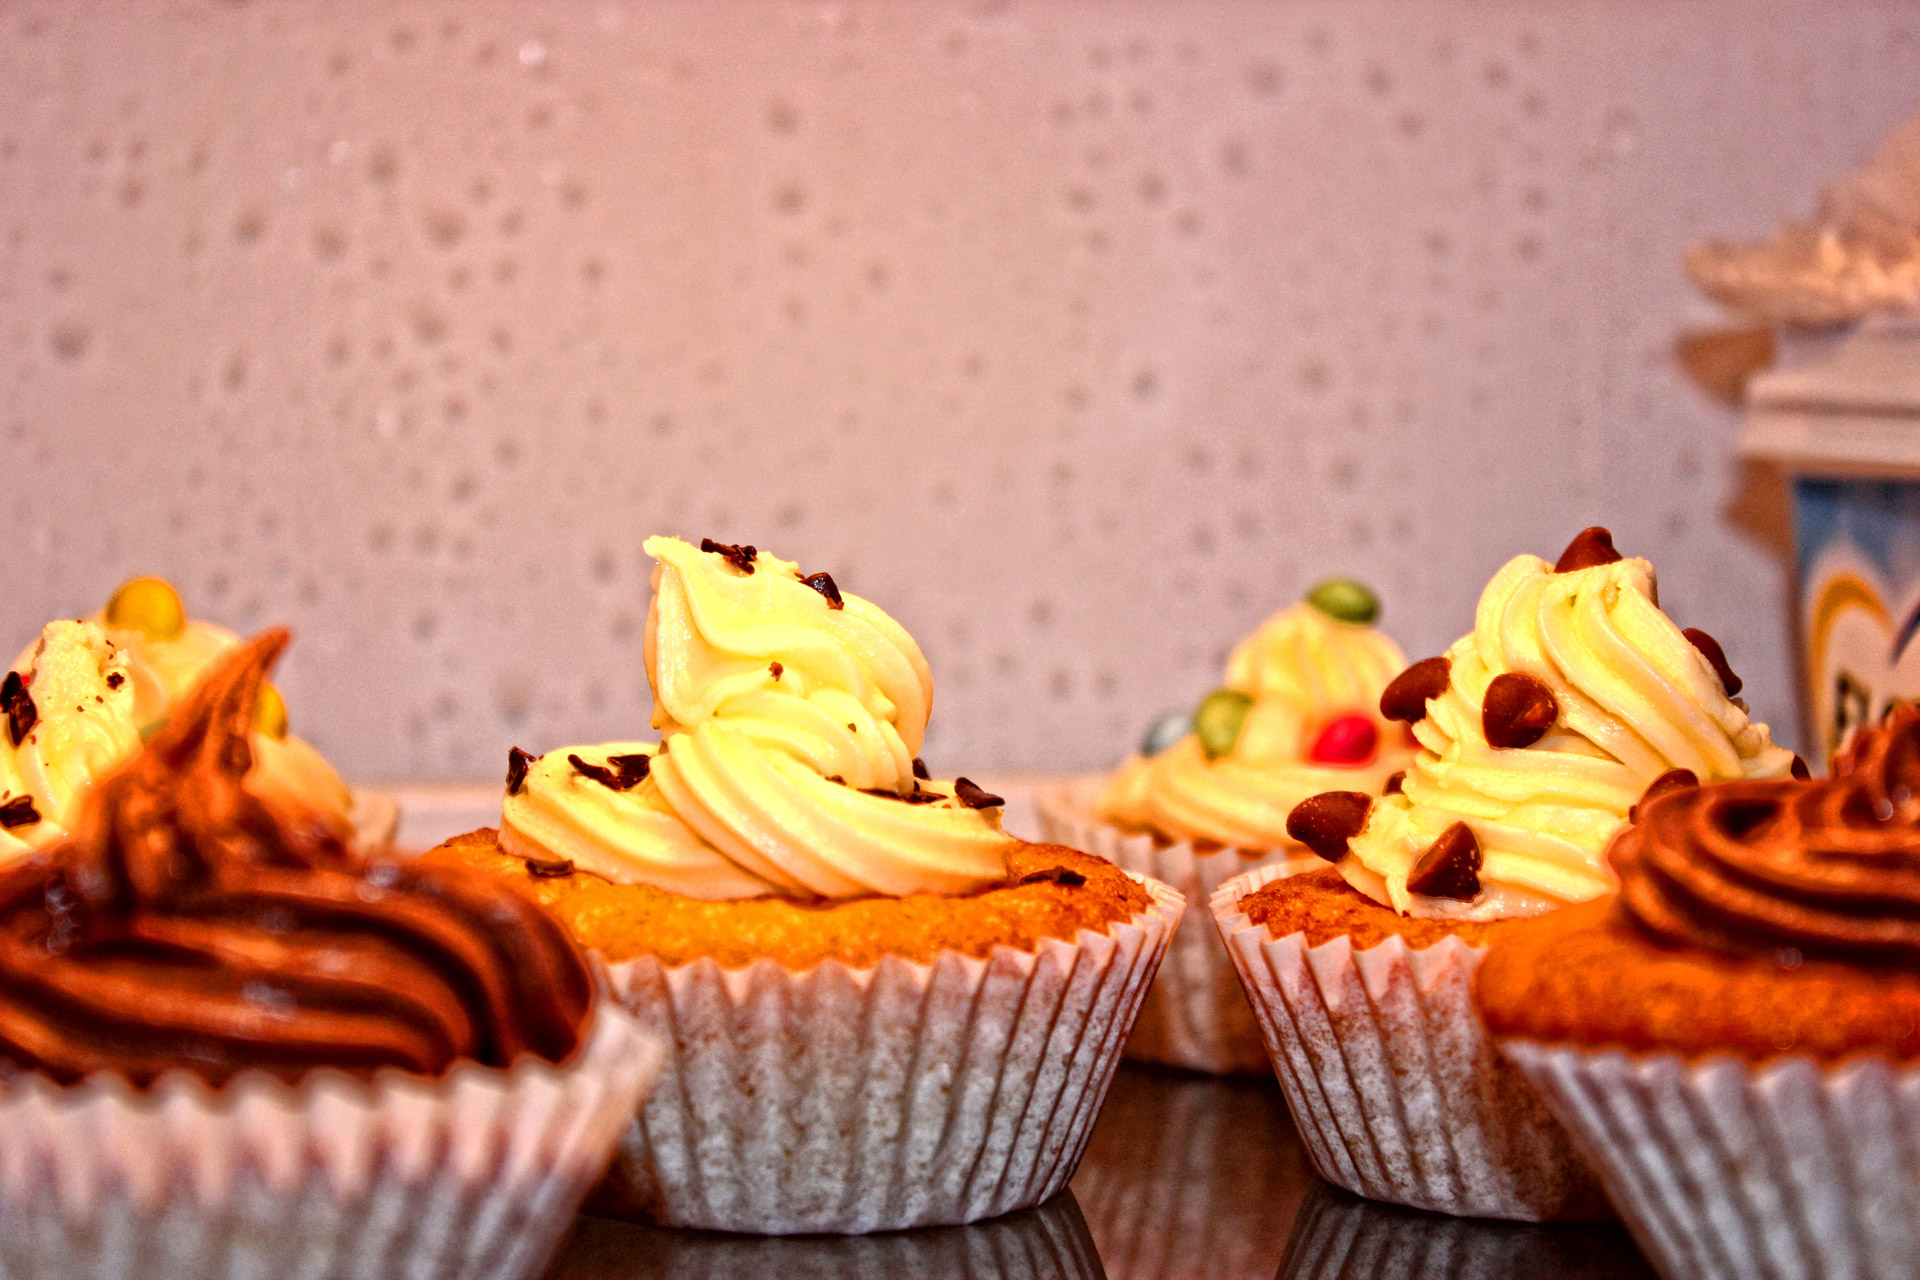 cupcakes-homemade-free-stock-photo-public-domain-pictures